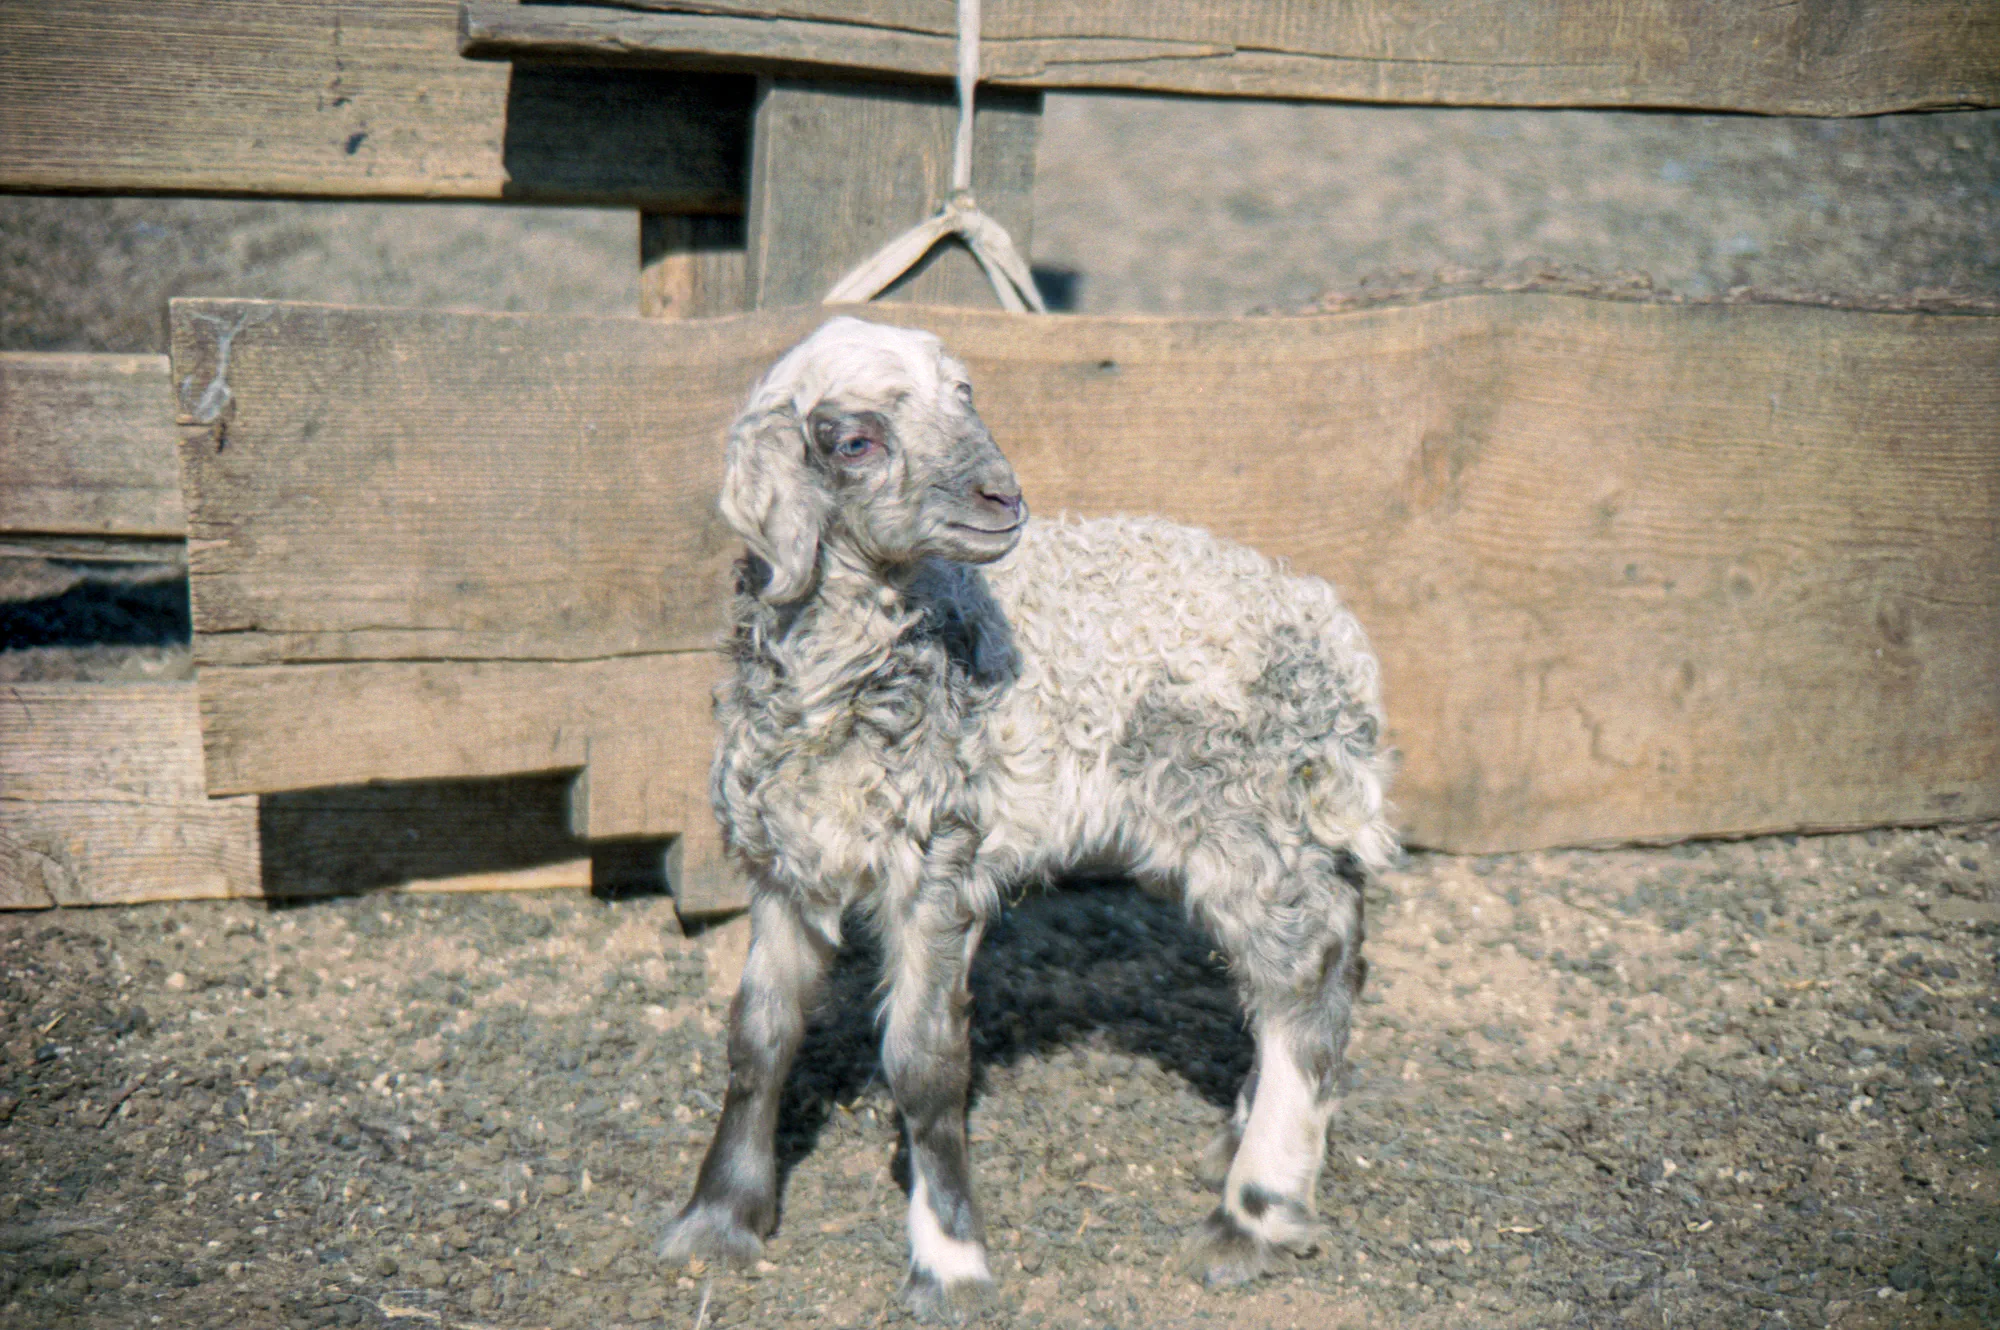 Baby Goats are Evil